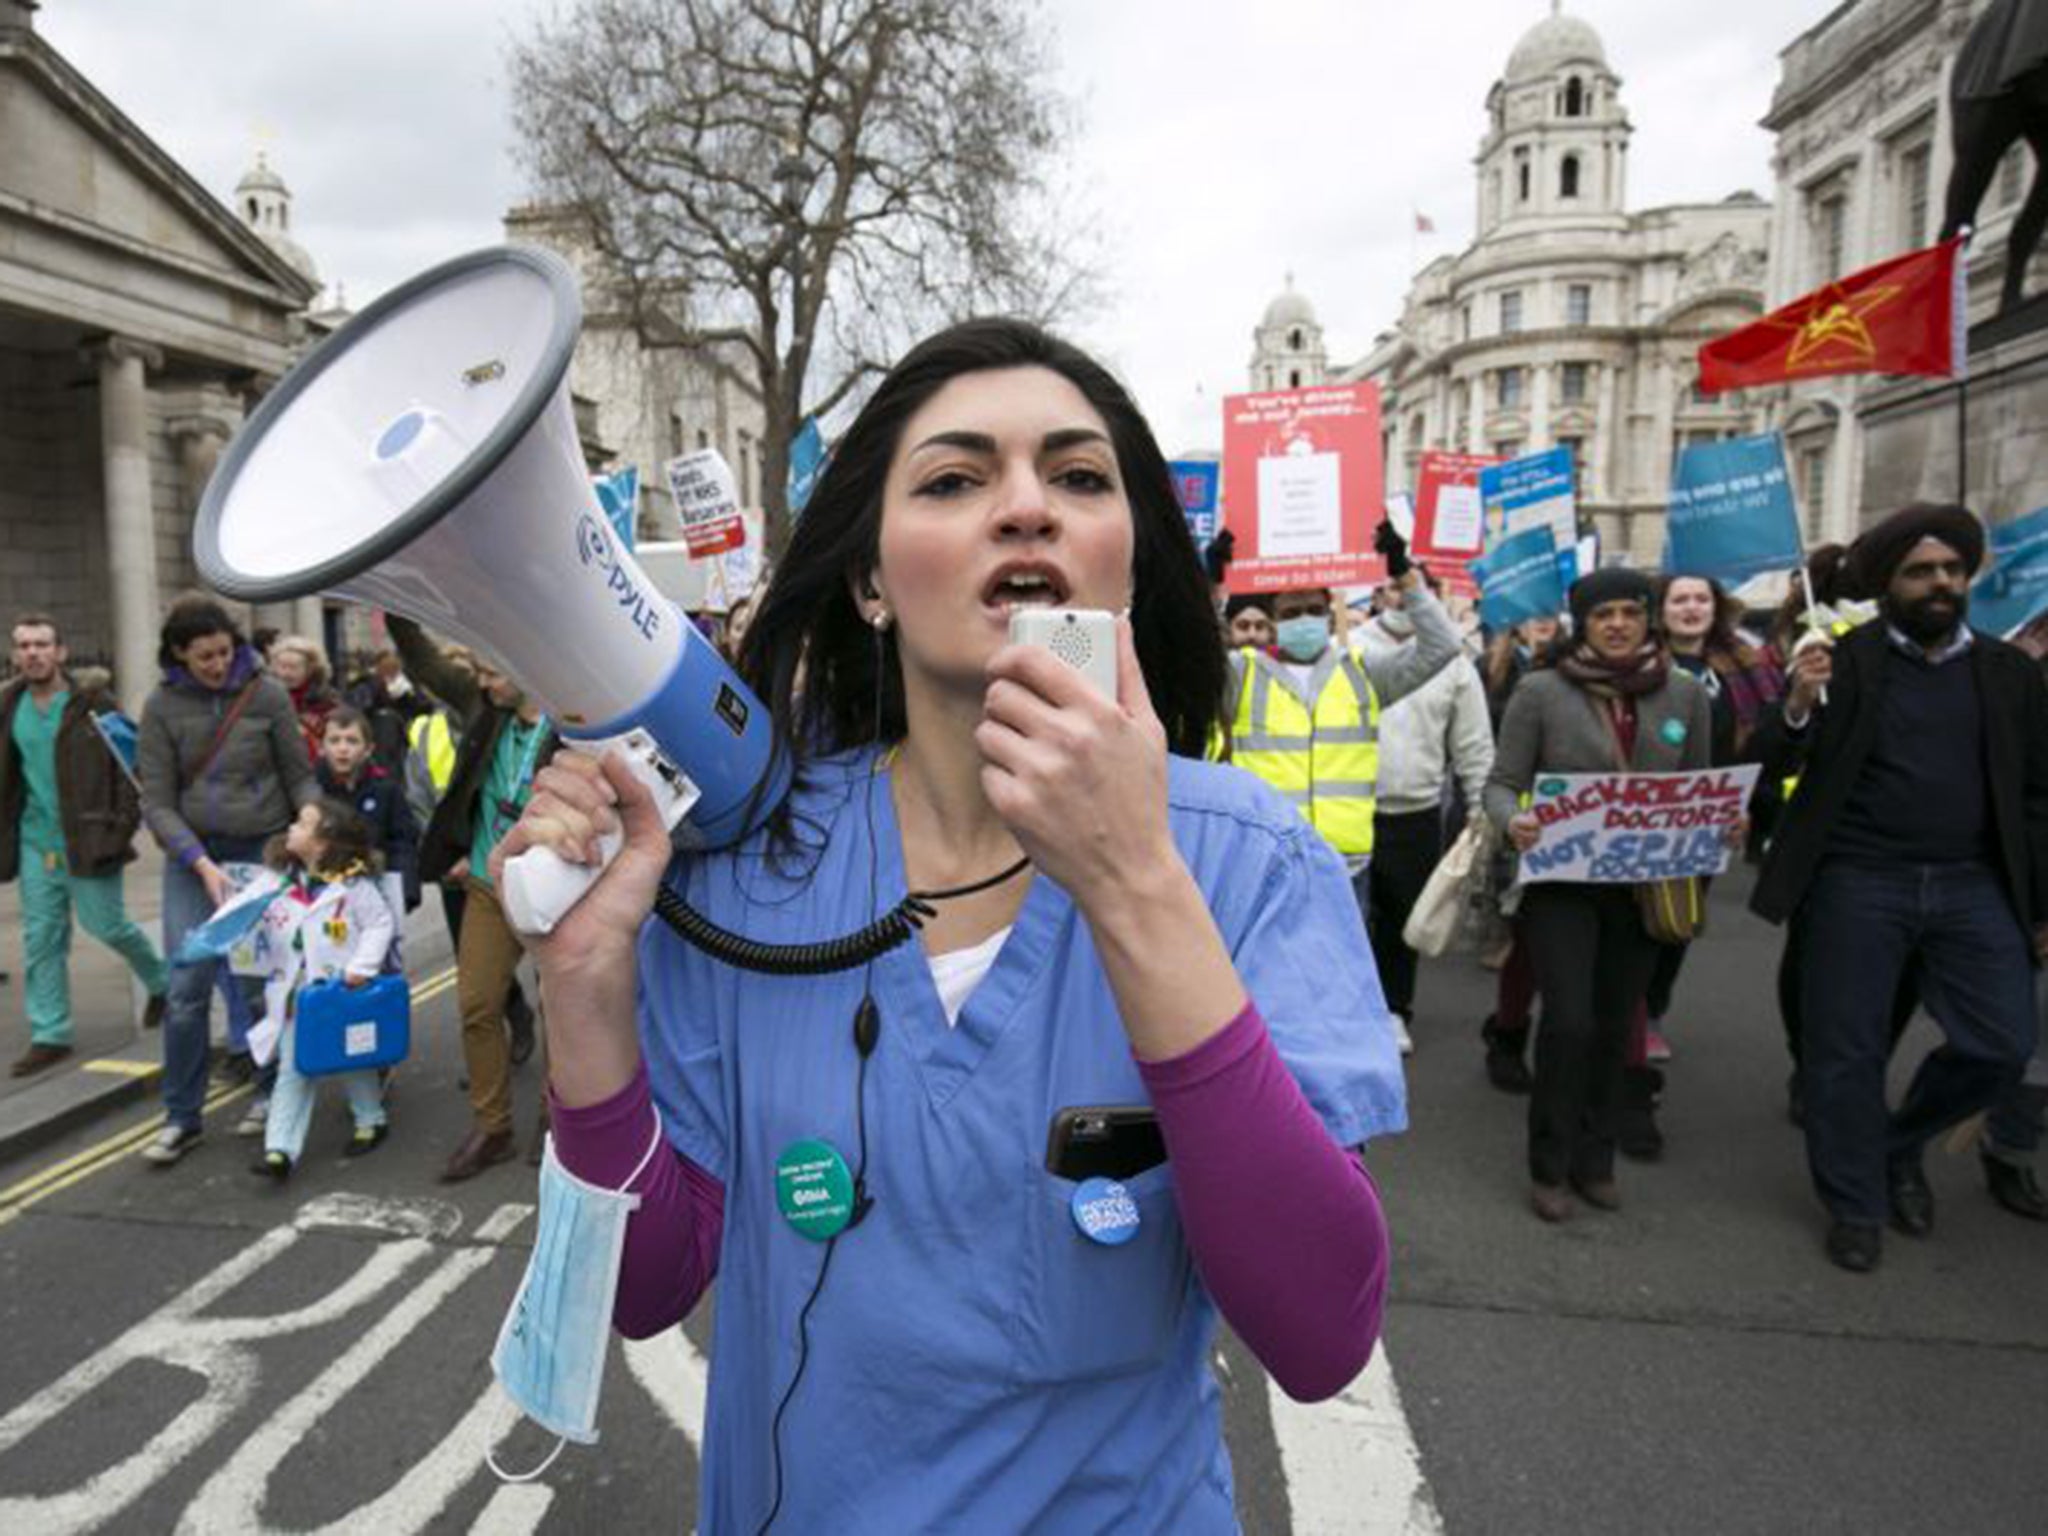 &#13;
Doctors strike for the first time in 40 years &#13;